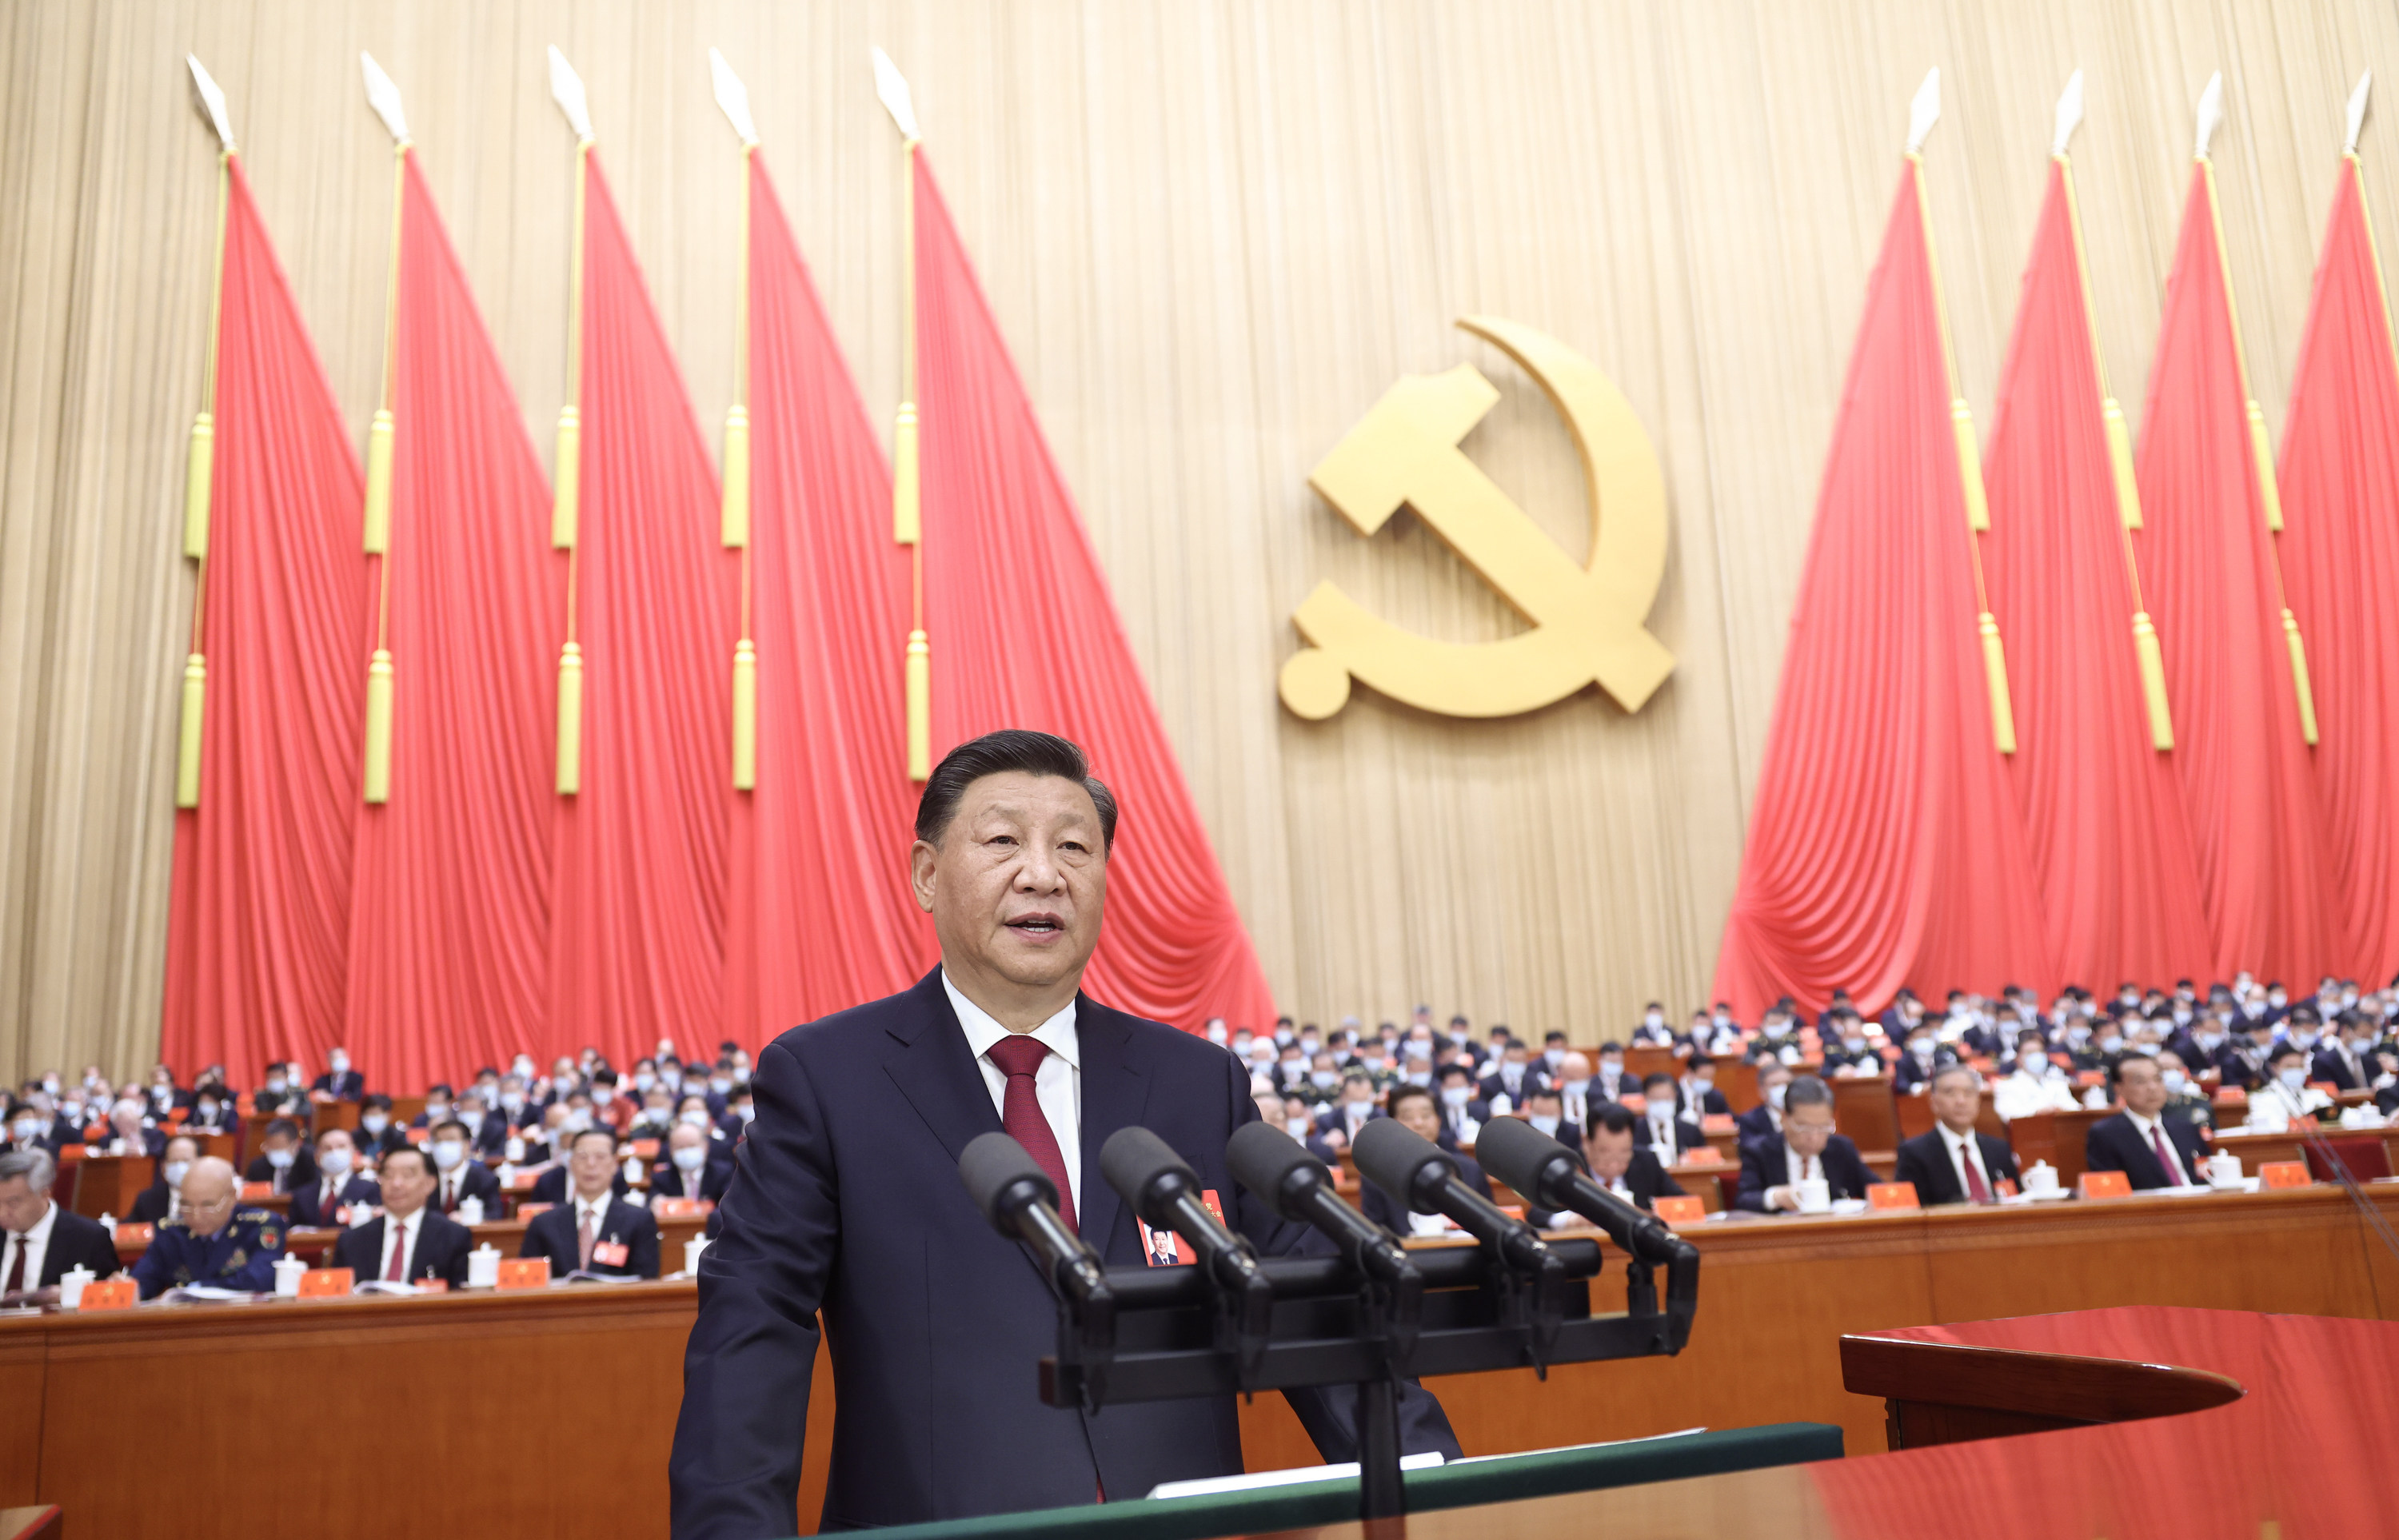 Xi Jinping delivers a report at the 20th National Congress of the Communist Party of China in Beijing. The upcoming third plenum is a highly anticipated meeting of the party’s Central Committee. Photo: Xinhua
